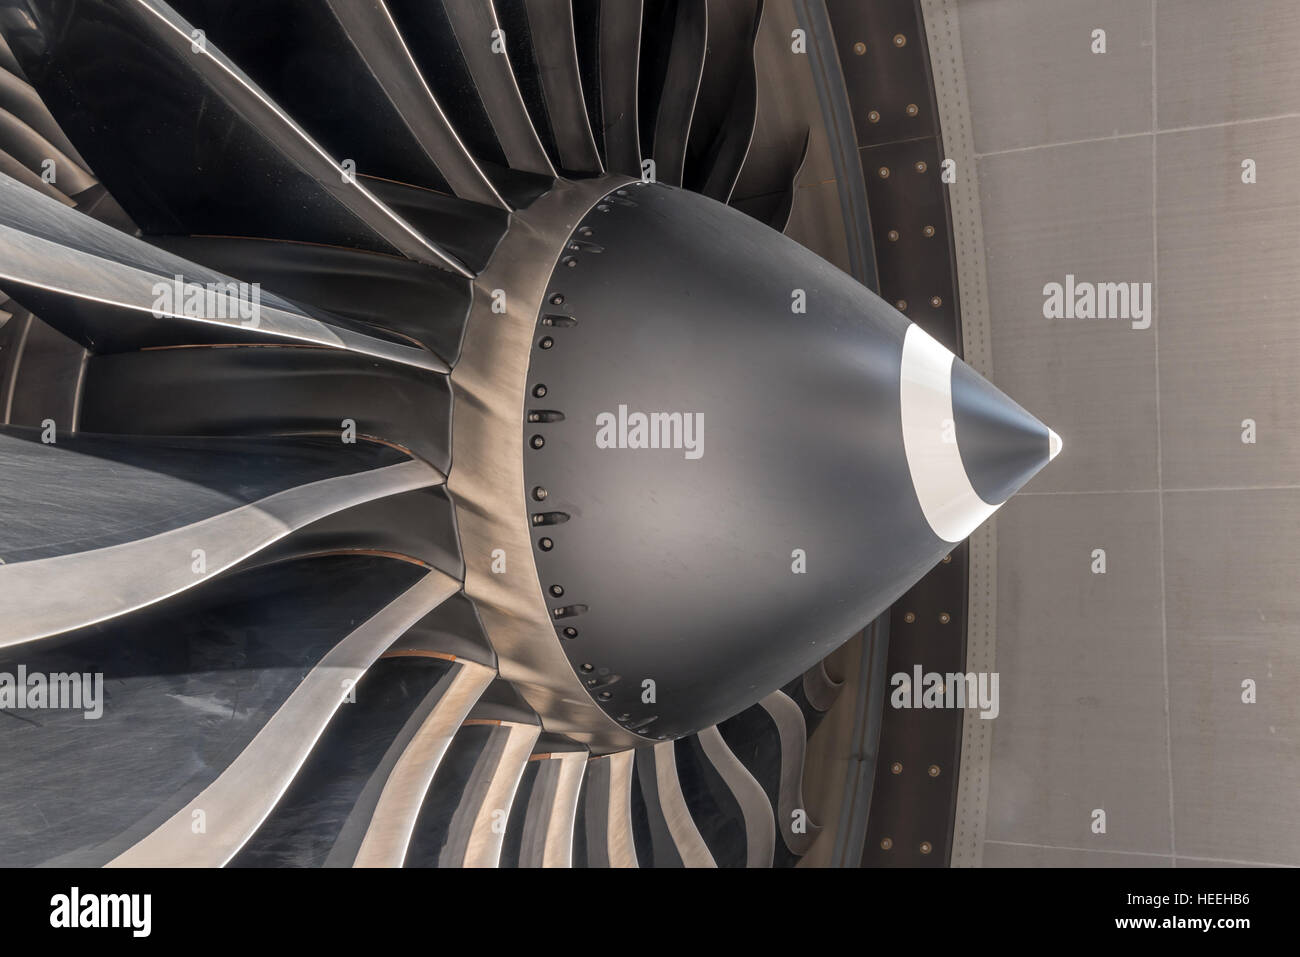 N1 fan blades on a large General Electric GE90 high bypass ratio turbine engine powering large modern airliners Stock Photo